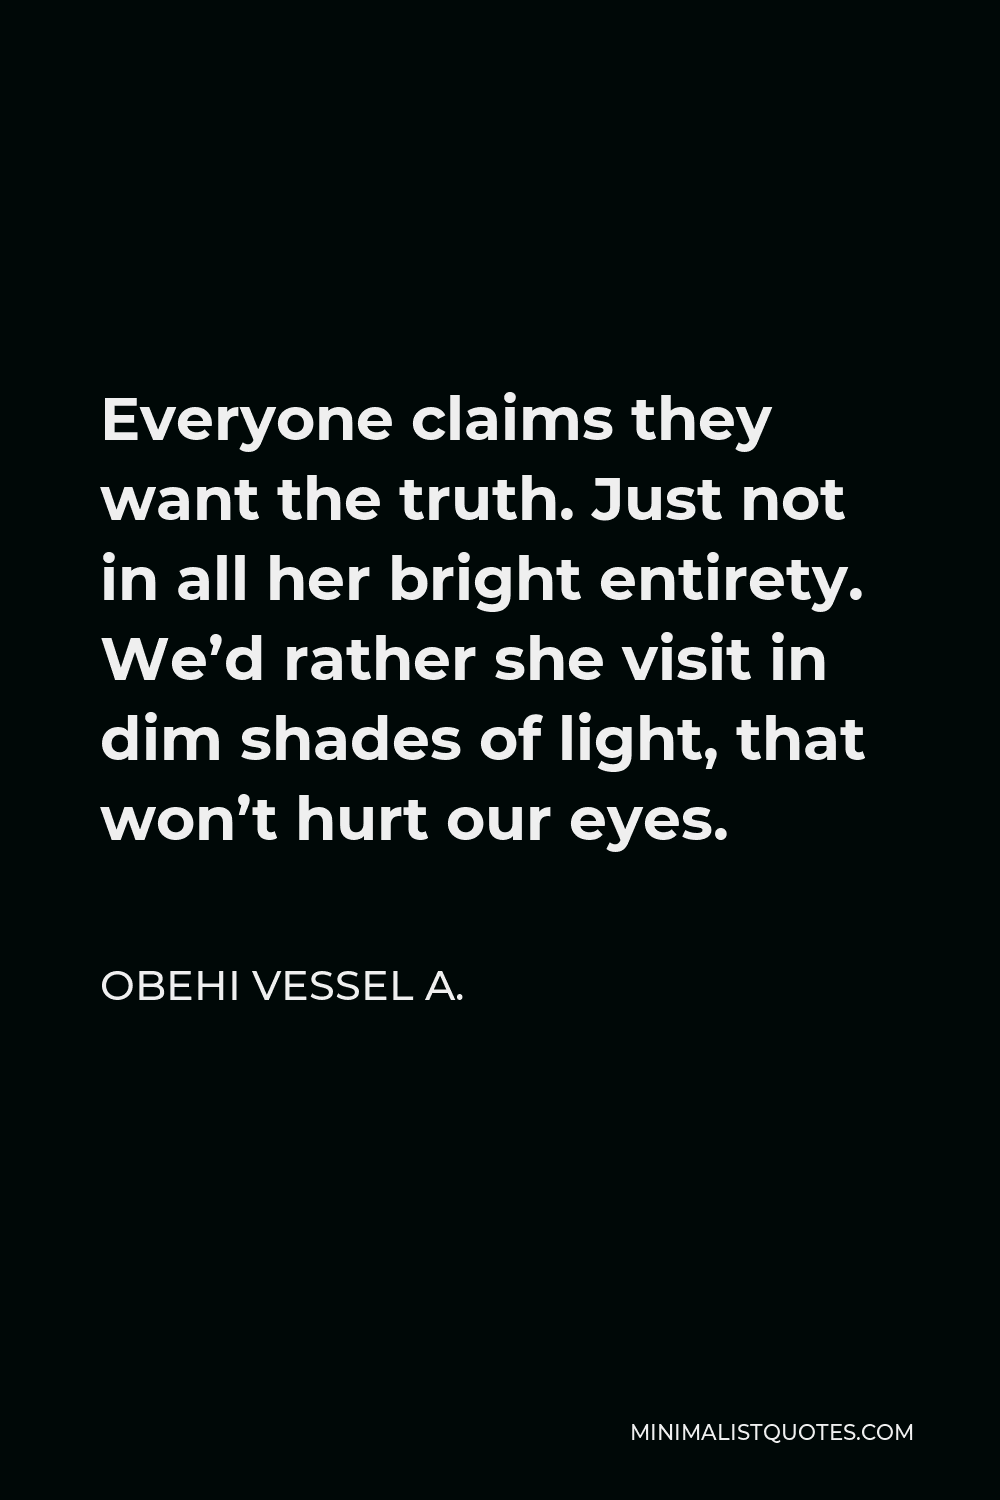 Obehi Vessel A. Quote - Everyone claims they want the truth. Just not in all her bright entirety. We’d rather she visit in dim shades of light, that won’t hurt our eyes.